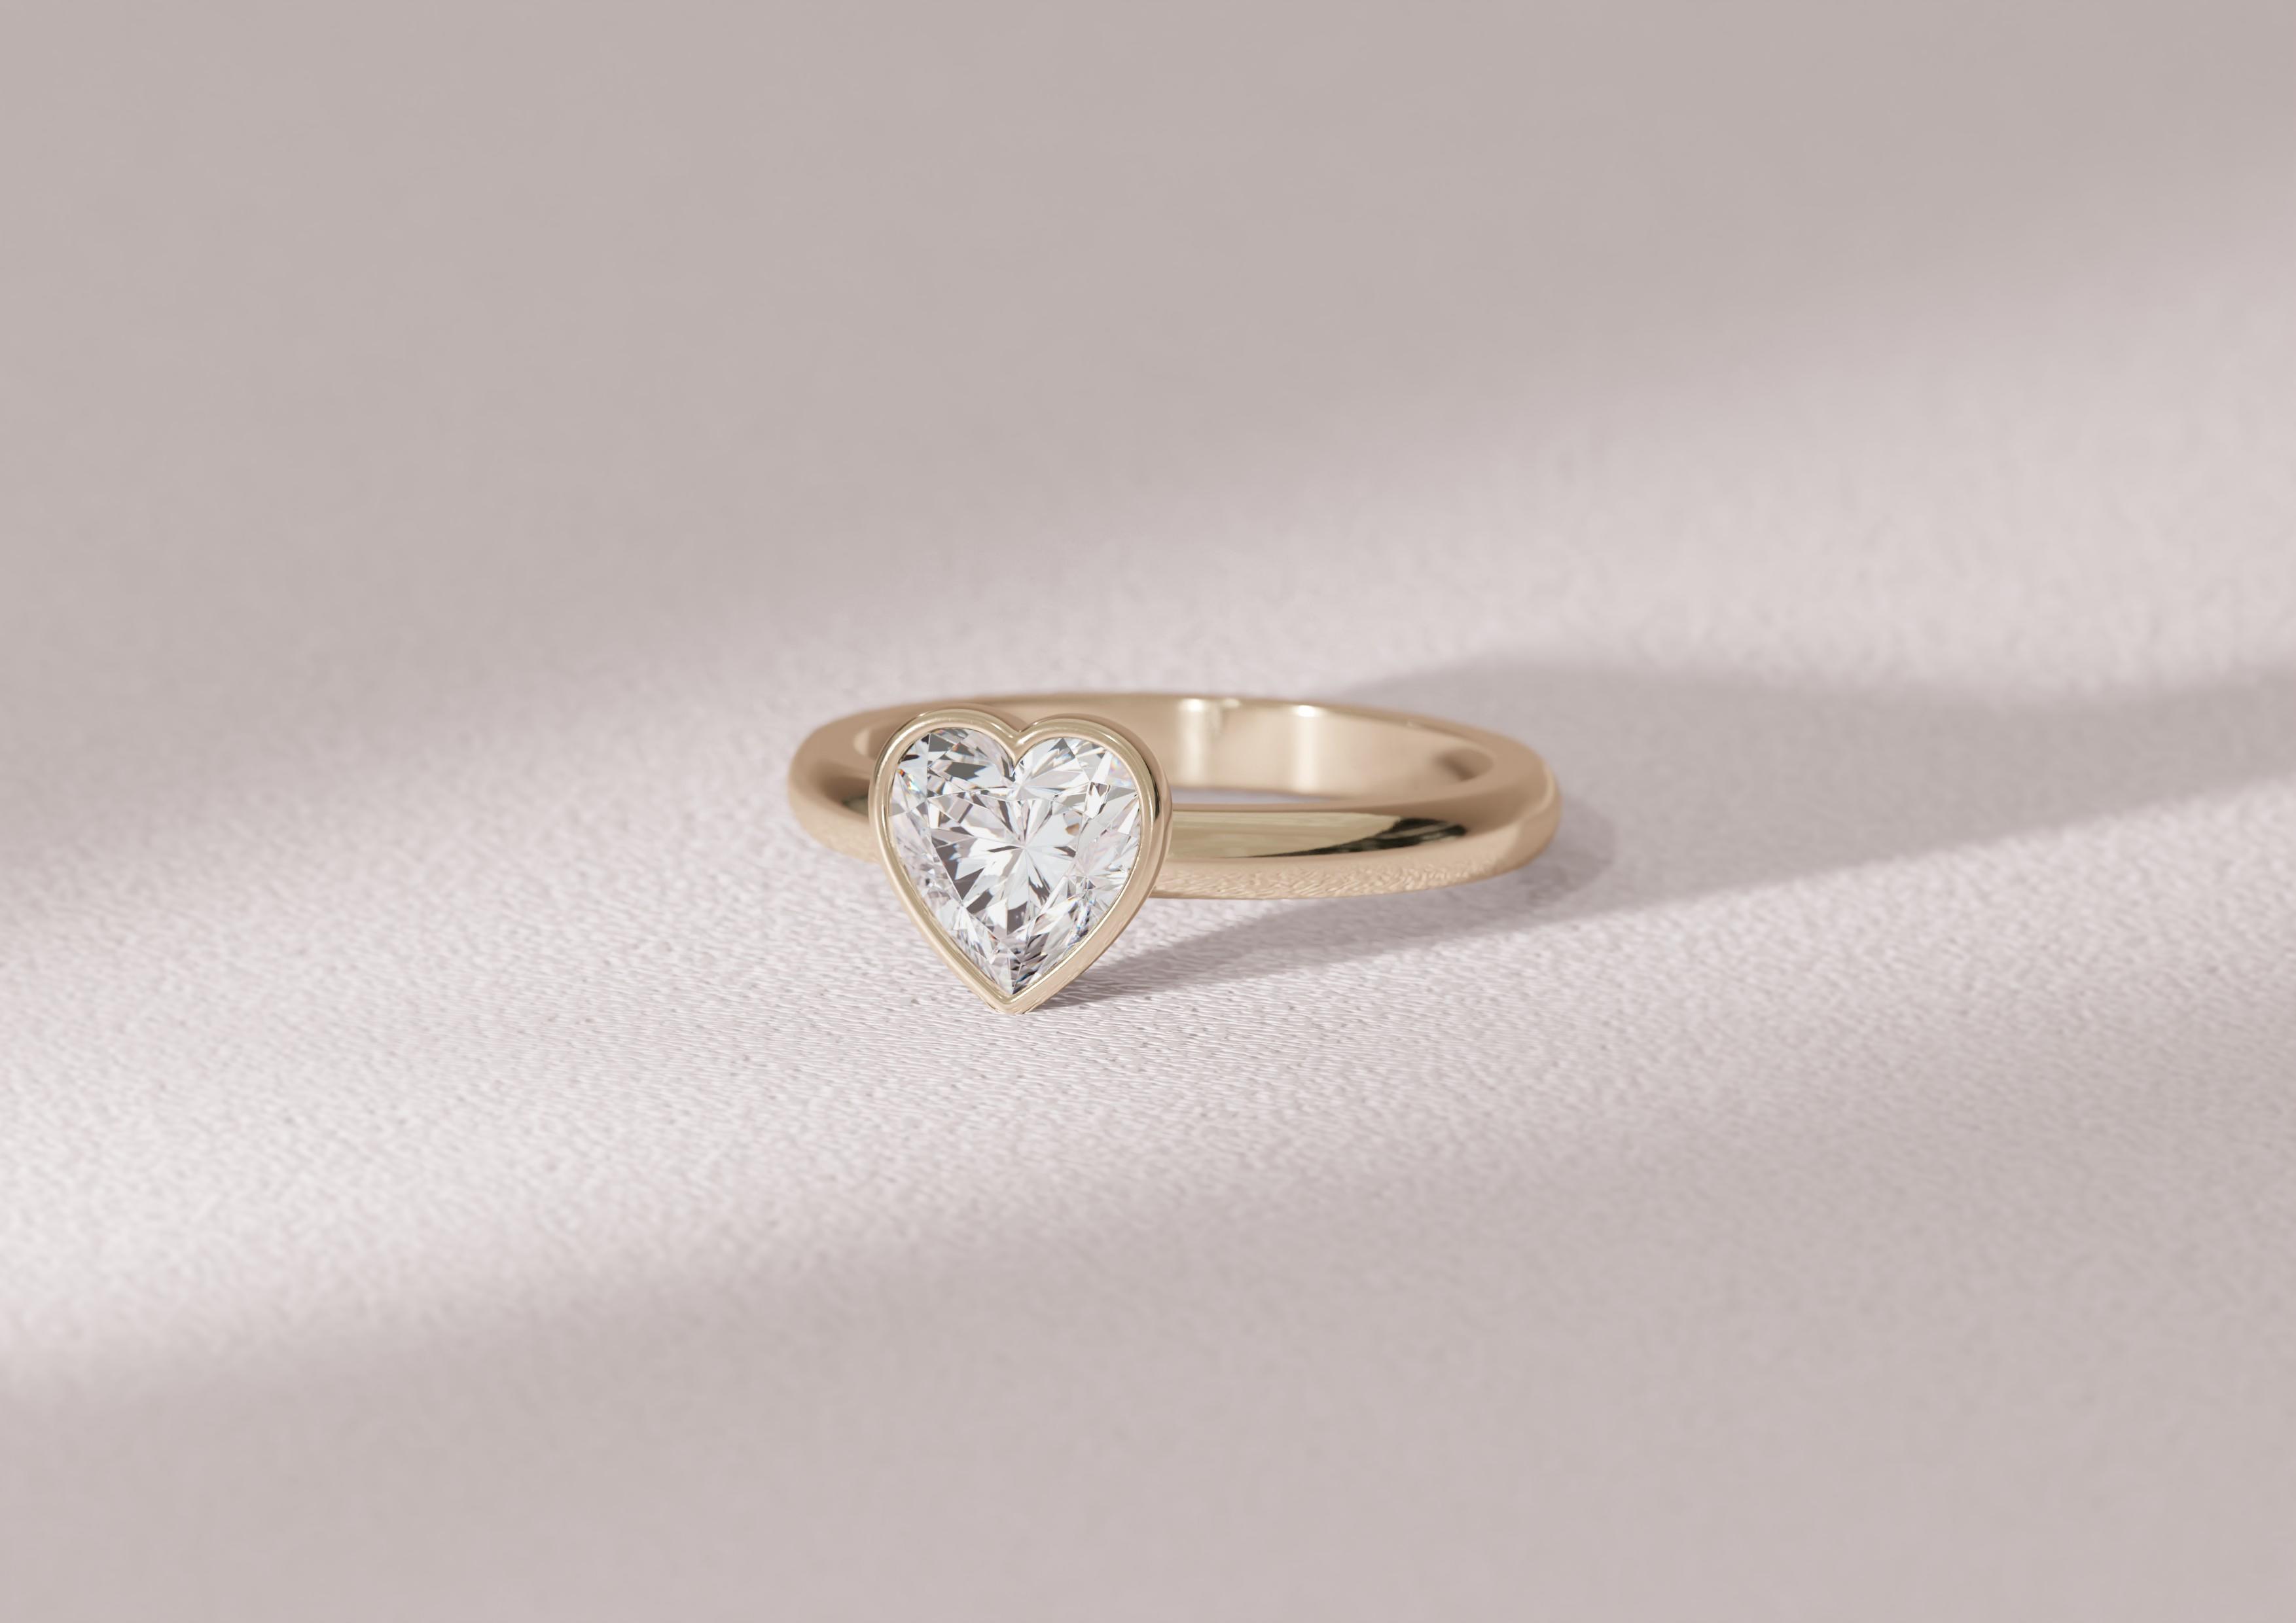 Heart cut diamond in full bezel with a rose gold band